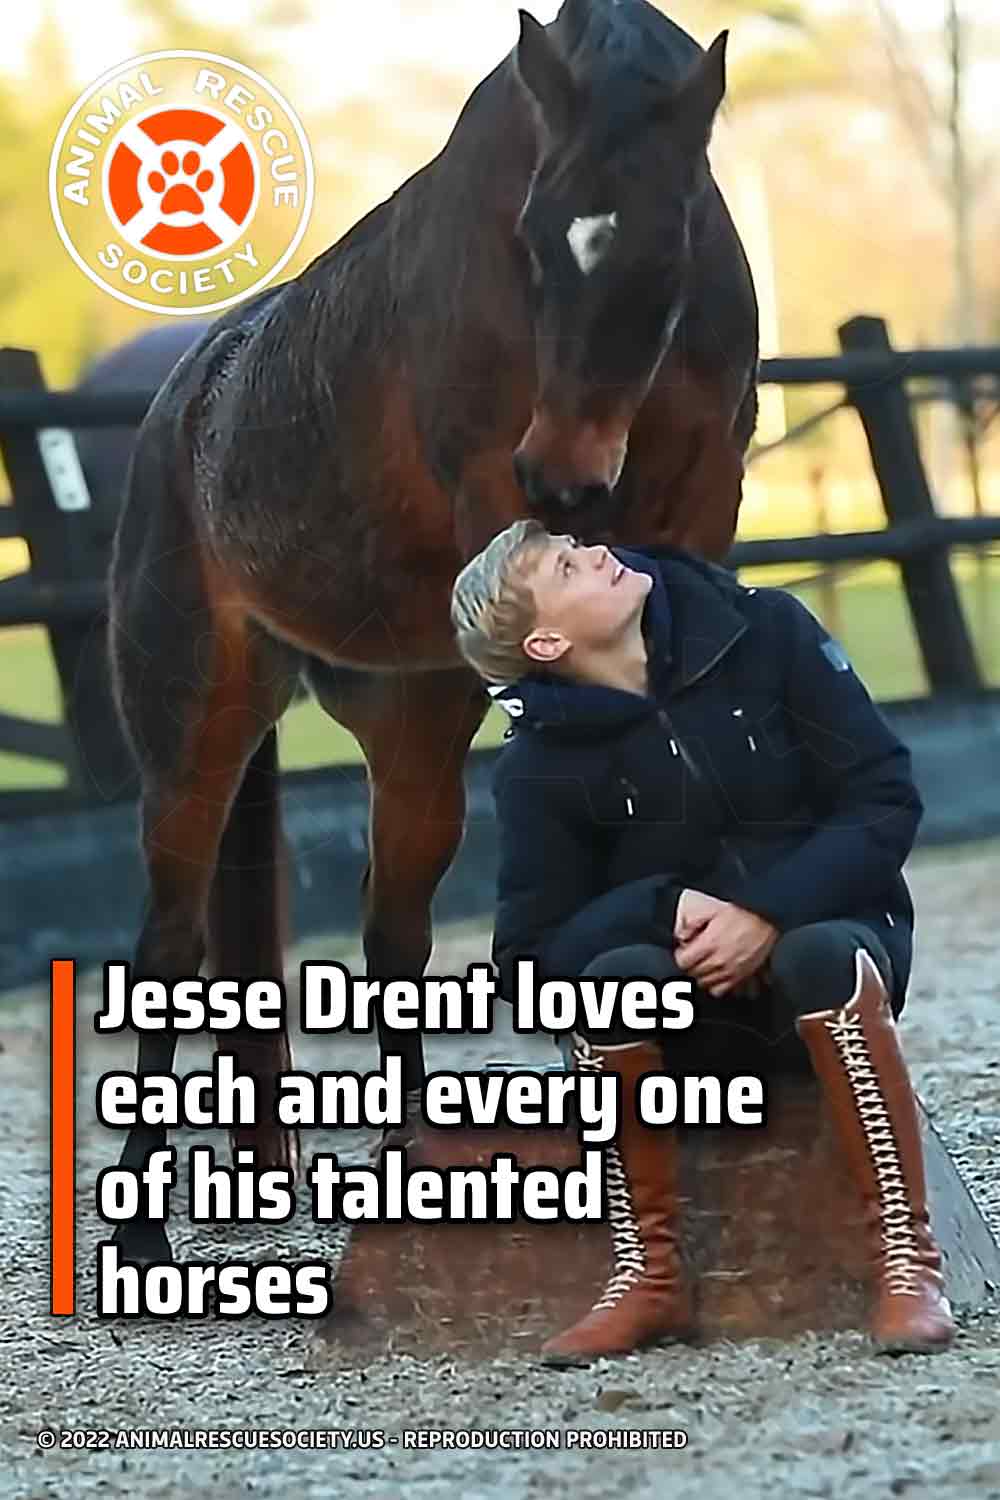 Jesse Drent loves each and every one of his talented horses